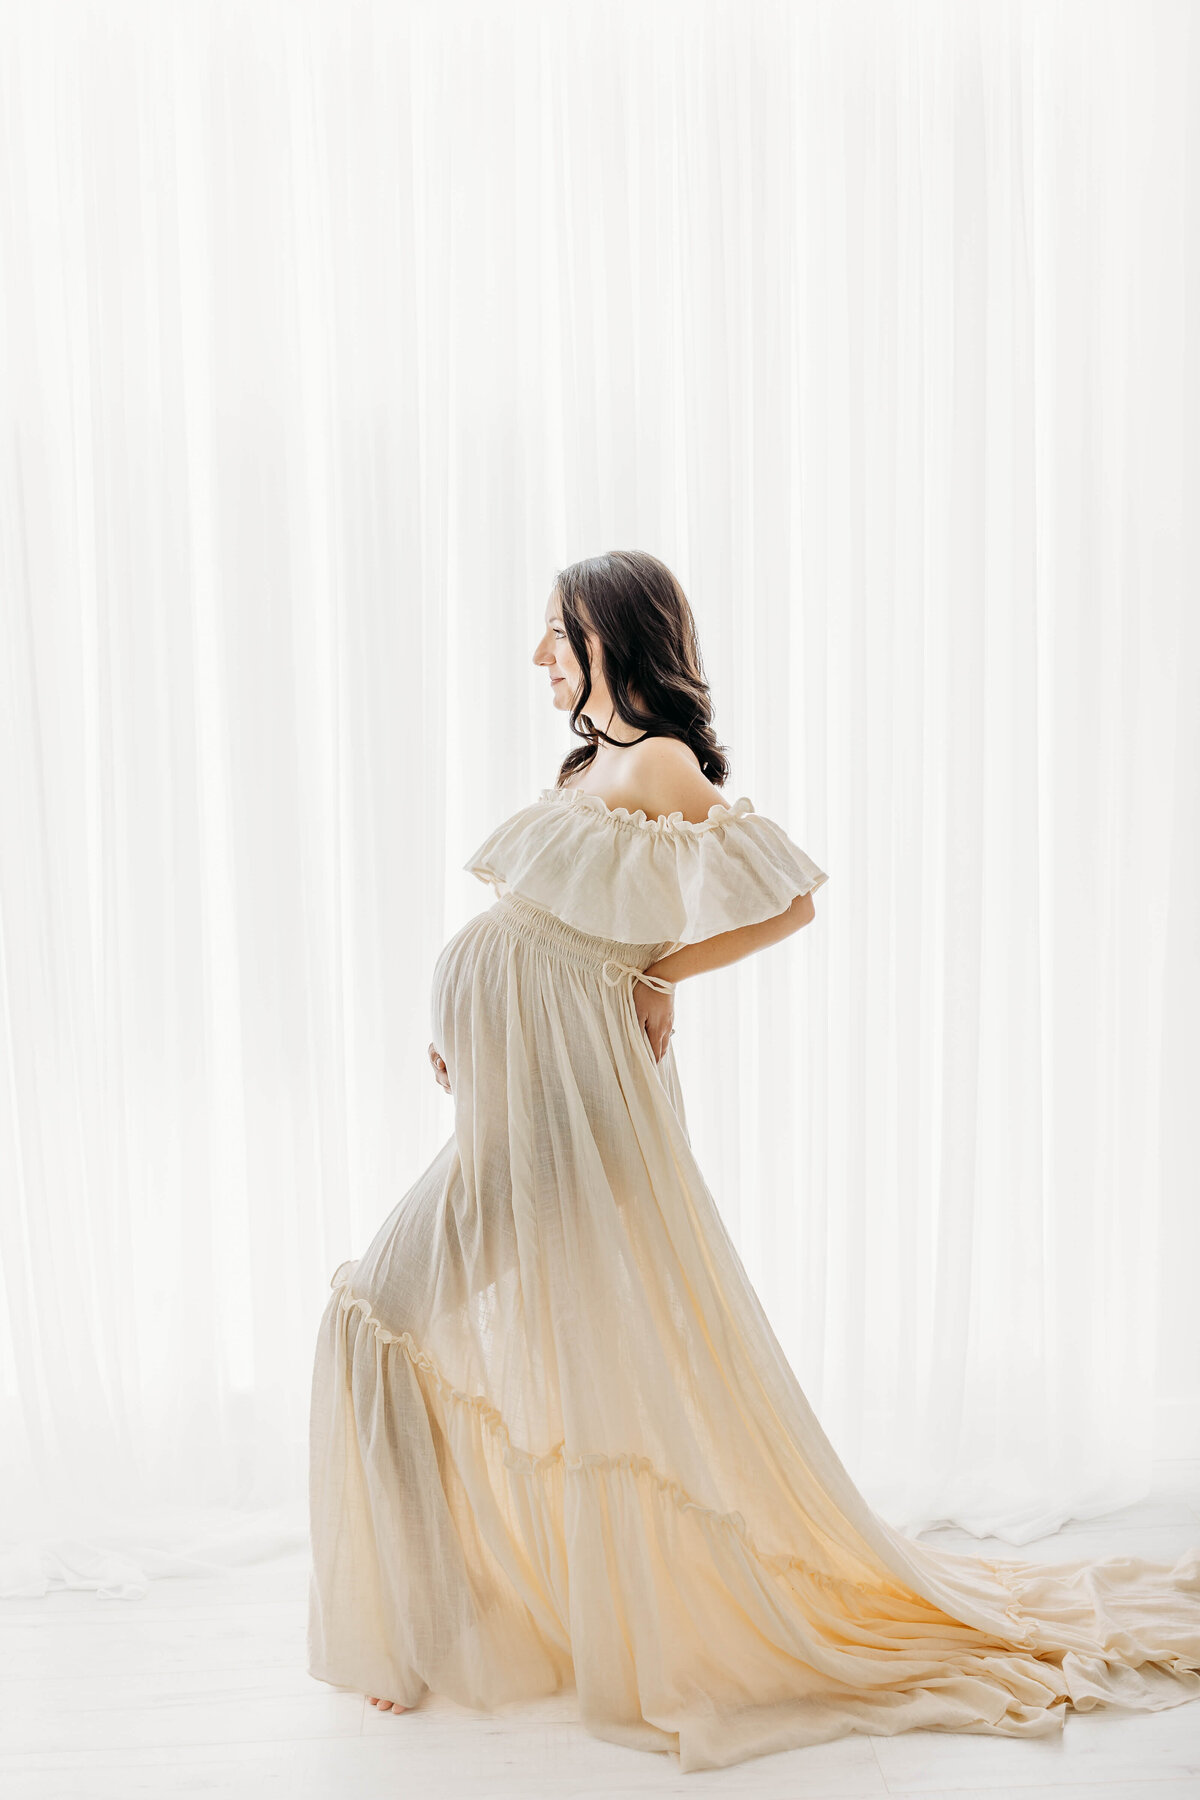 Pregnant mother posing in studio in from of wall of light beautiful dress